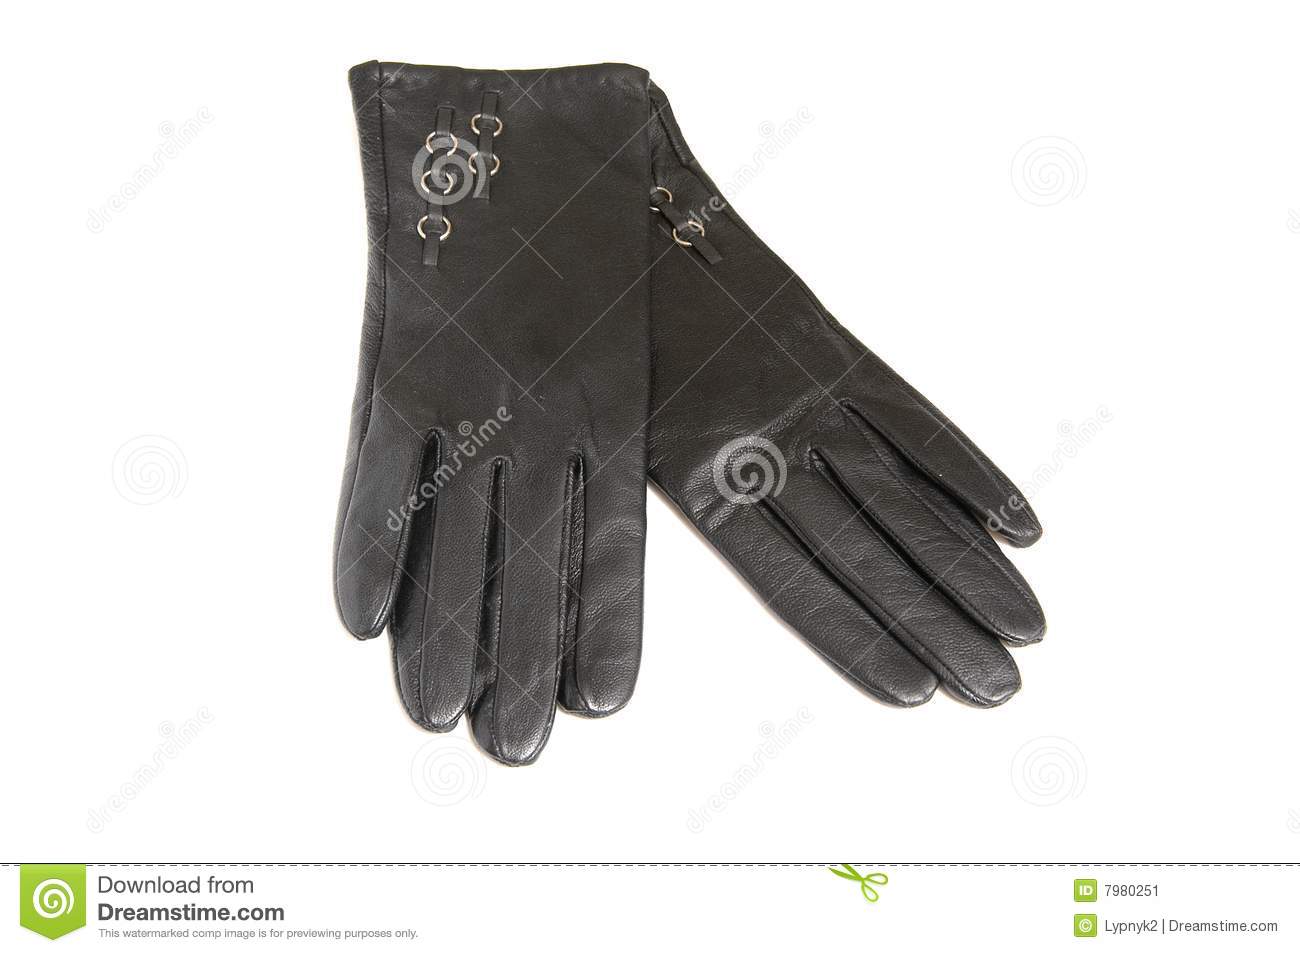 Pair Of Women S Gloves On A White Background  Stock Image   Image